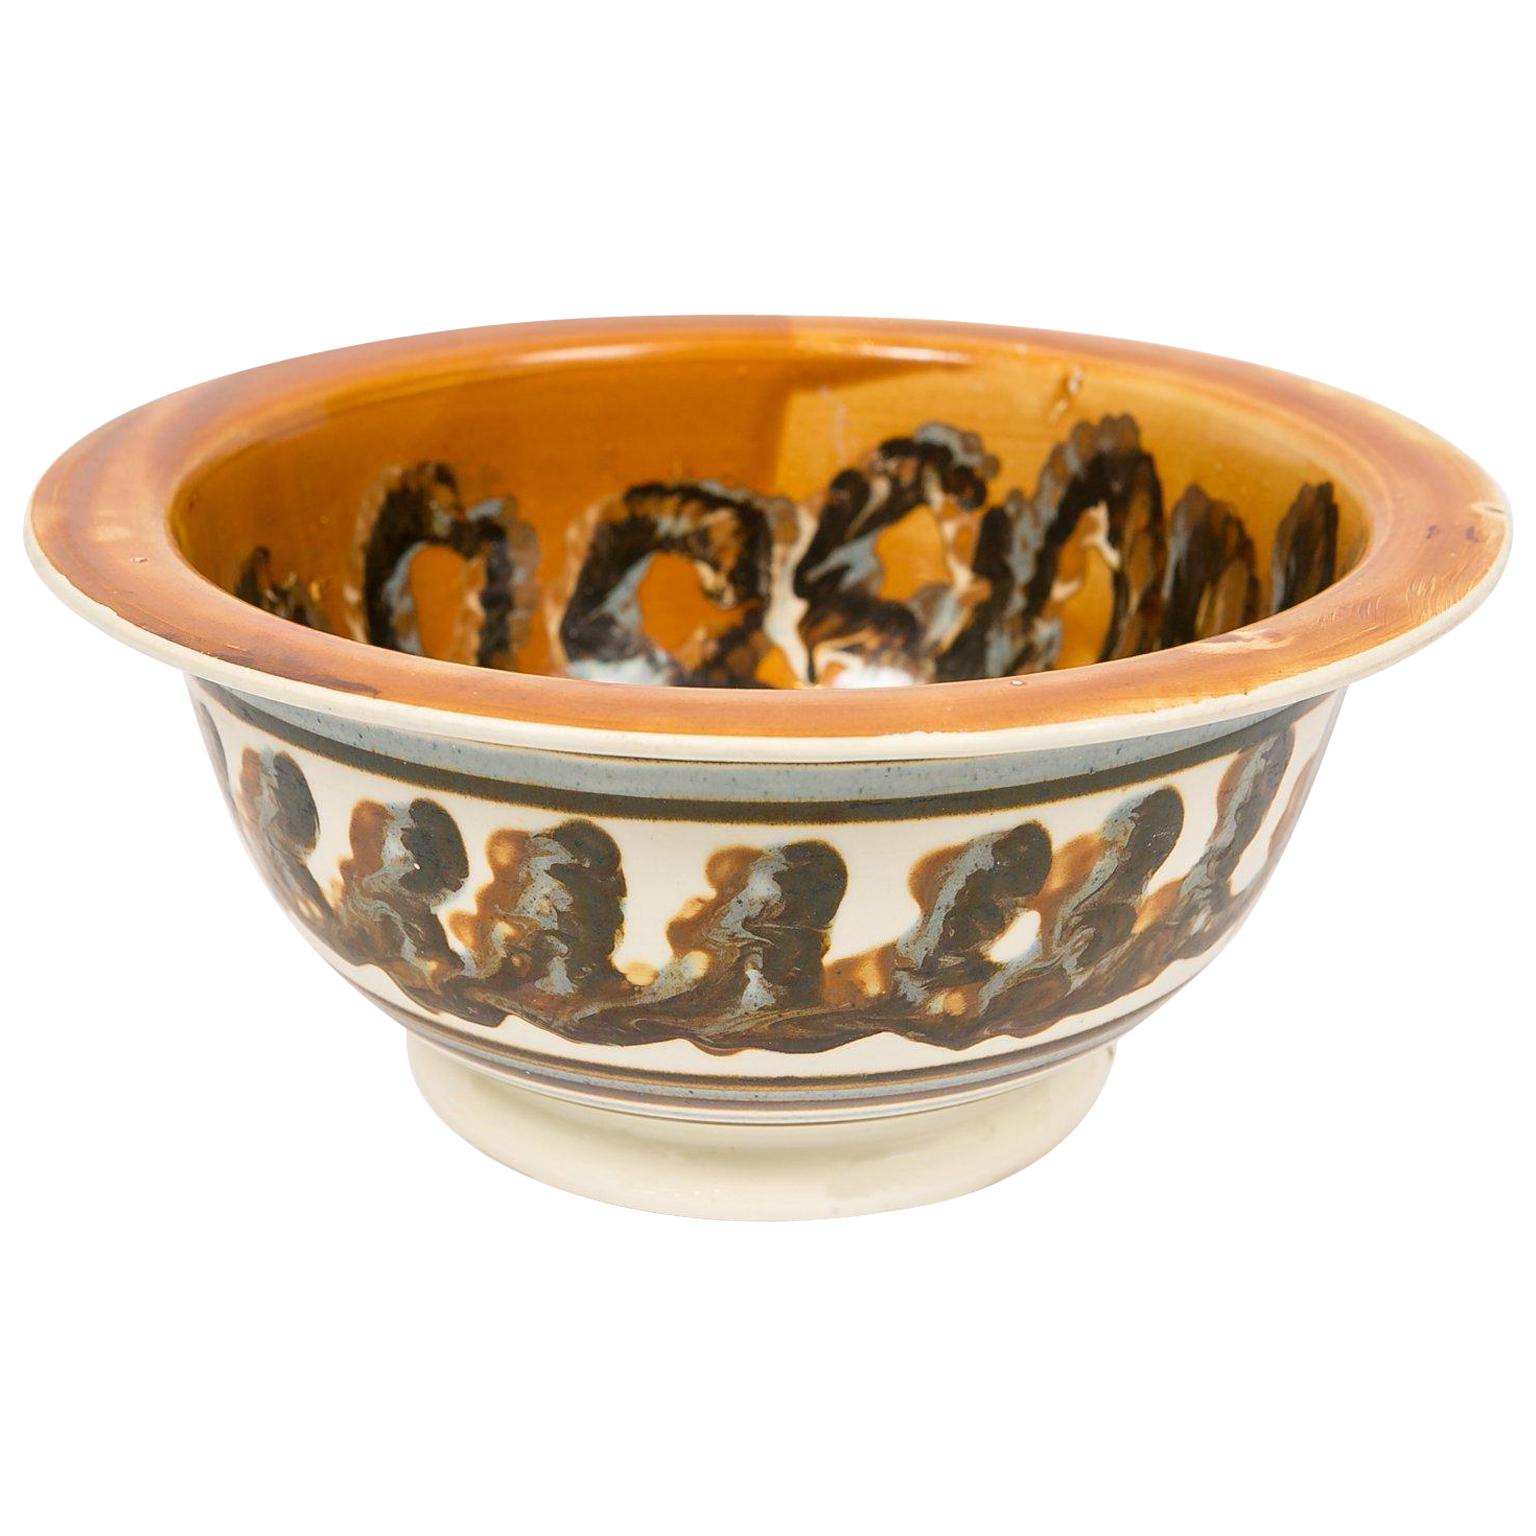 Large Mochaware Bowl with Both Cable and Marbled Decoration